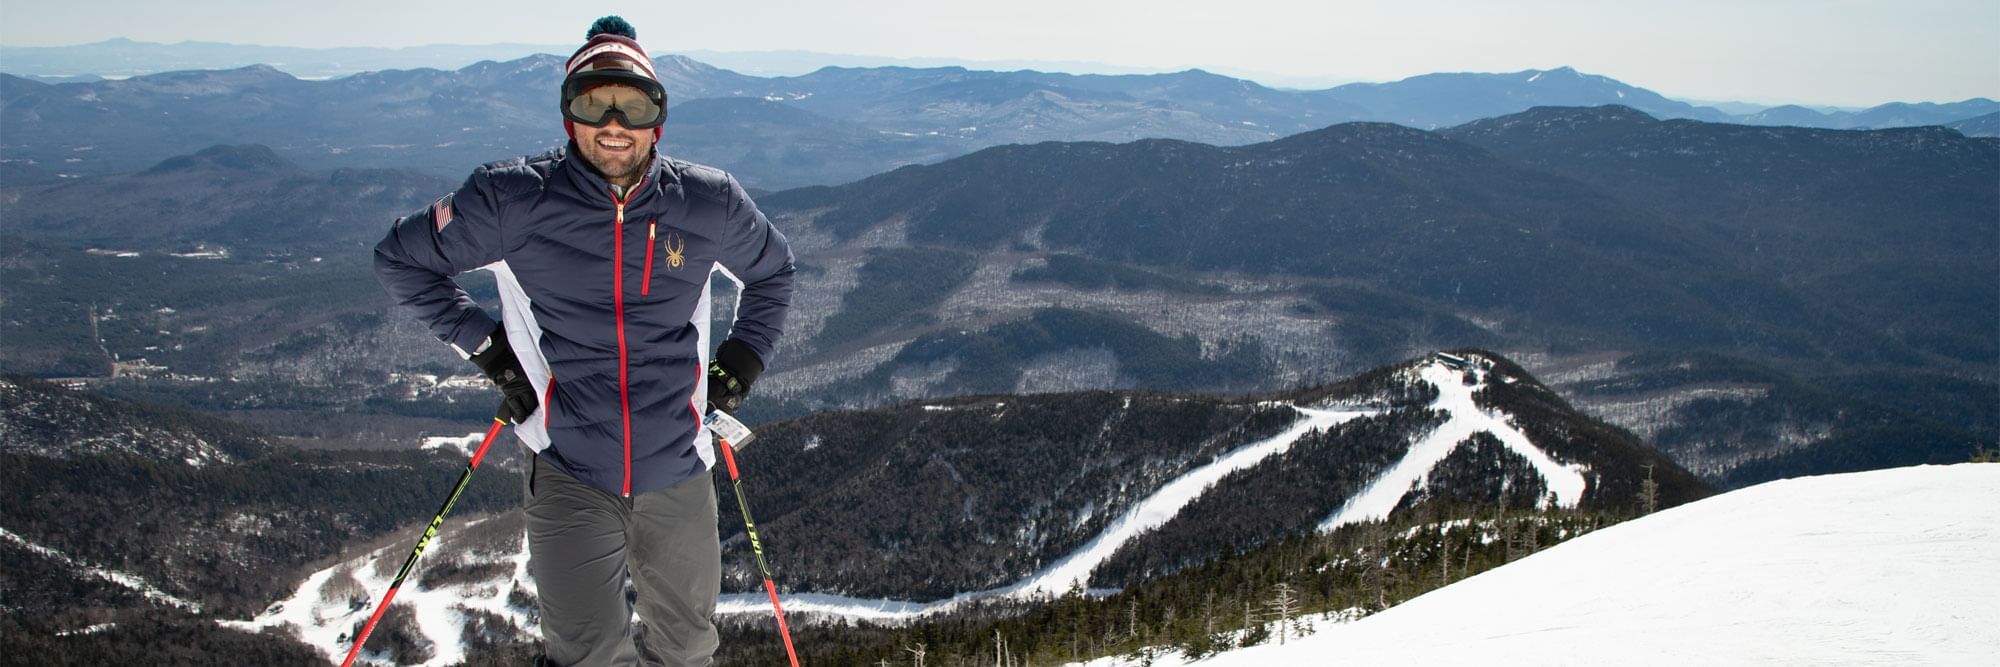 Man at Whiteface Mountain downhill skiing overlook.